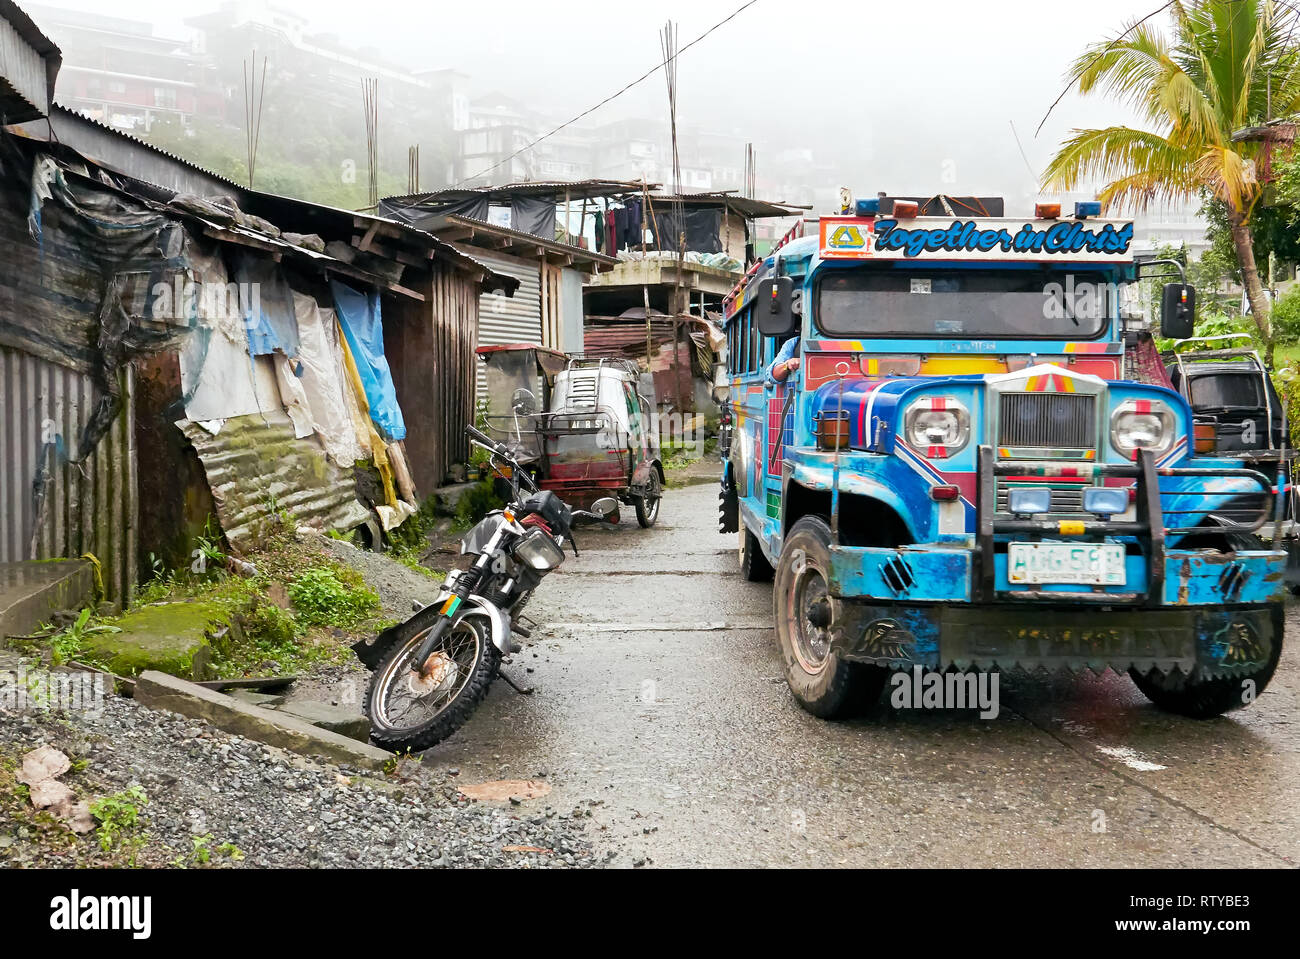 Banaue, Ifugao Province, Philippines - December 19, 2017: Scene of colorful jeepney riding on a road in Banaue, surrounded by typical poor shelters Stock Photo